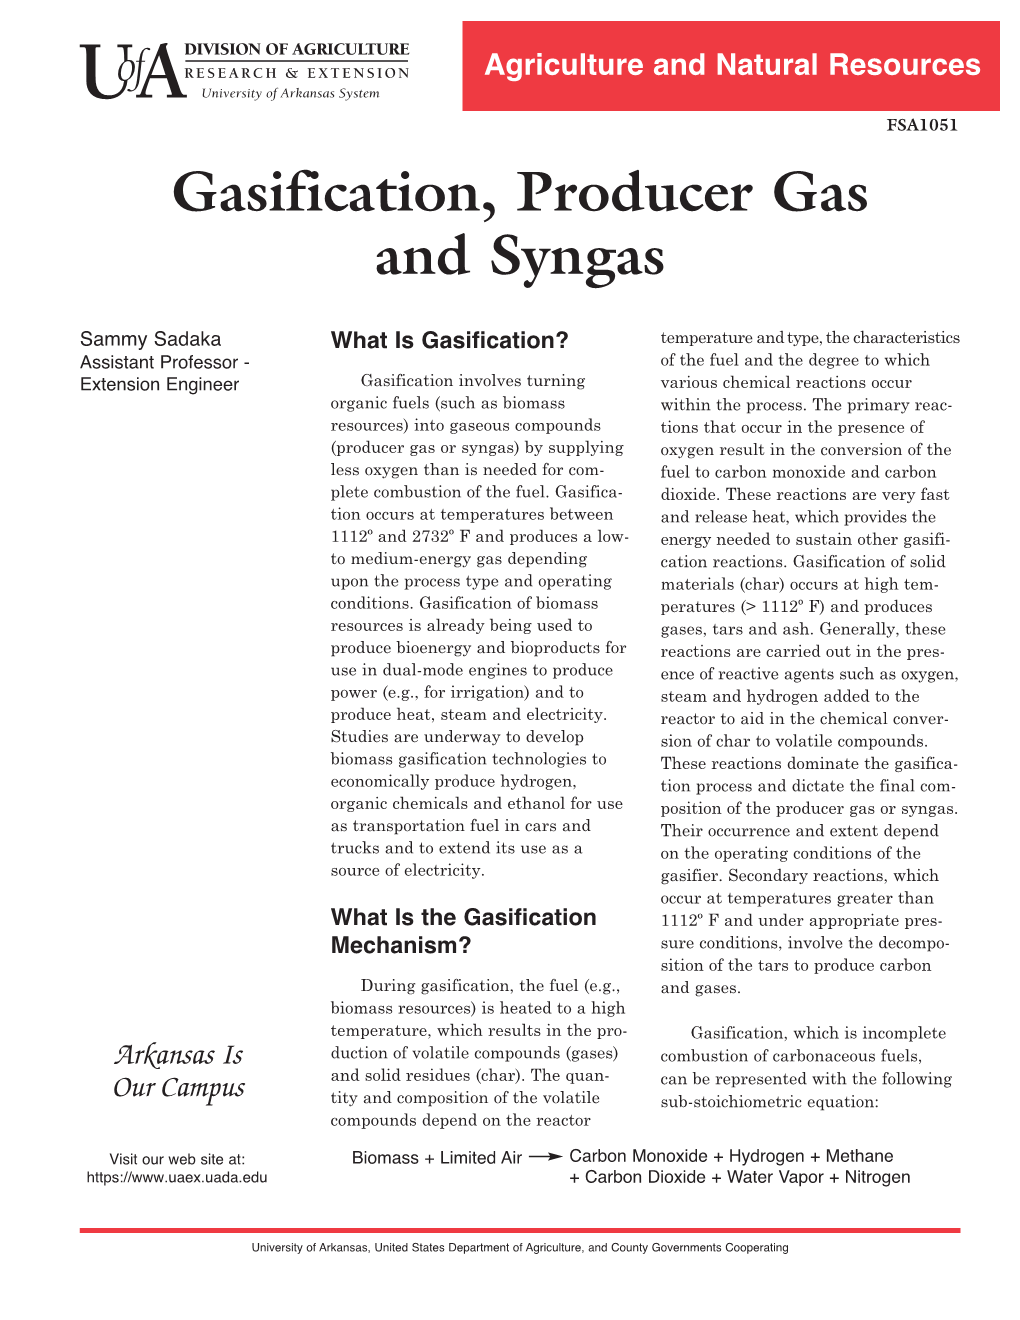 Gasification, Producer Gas and Syngas